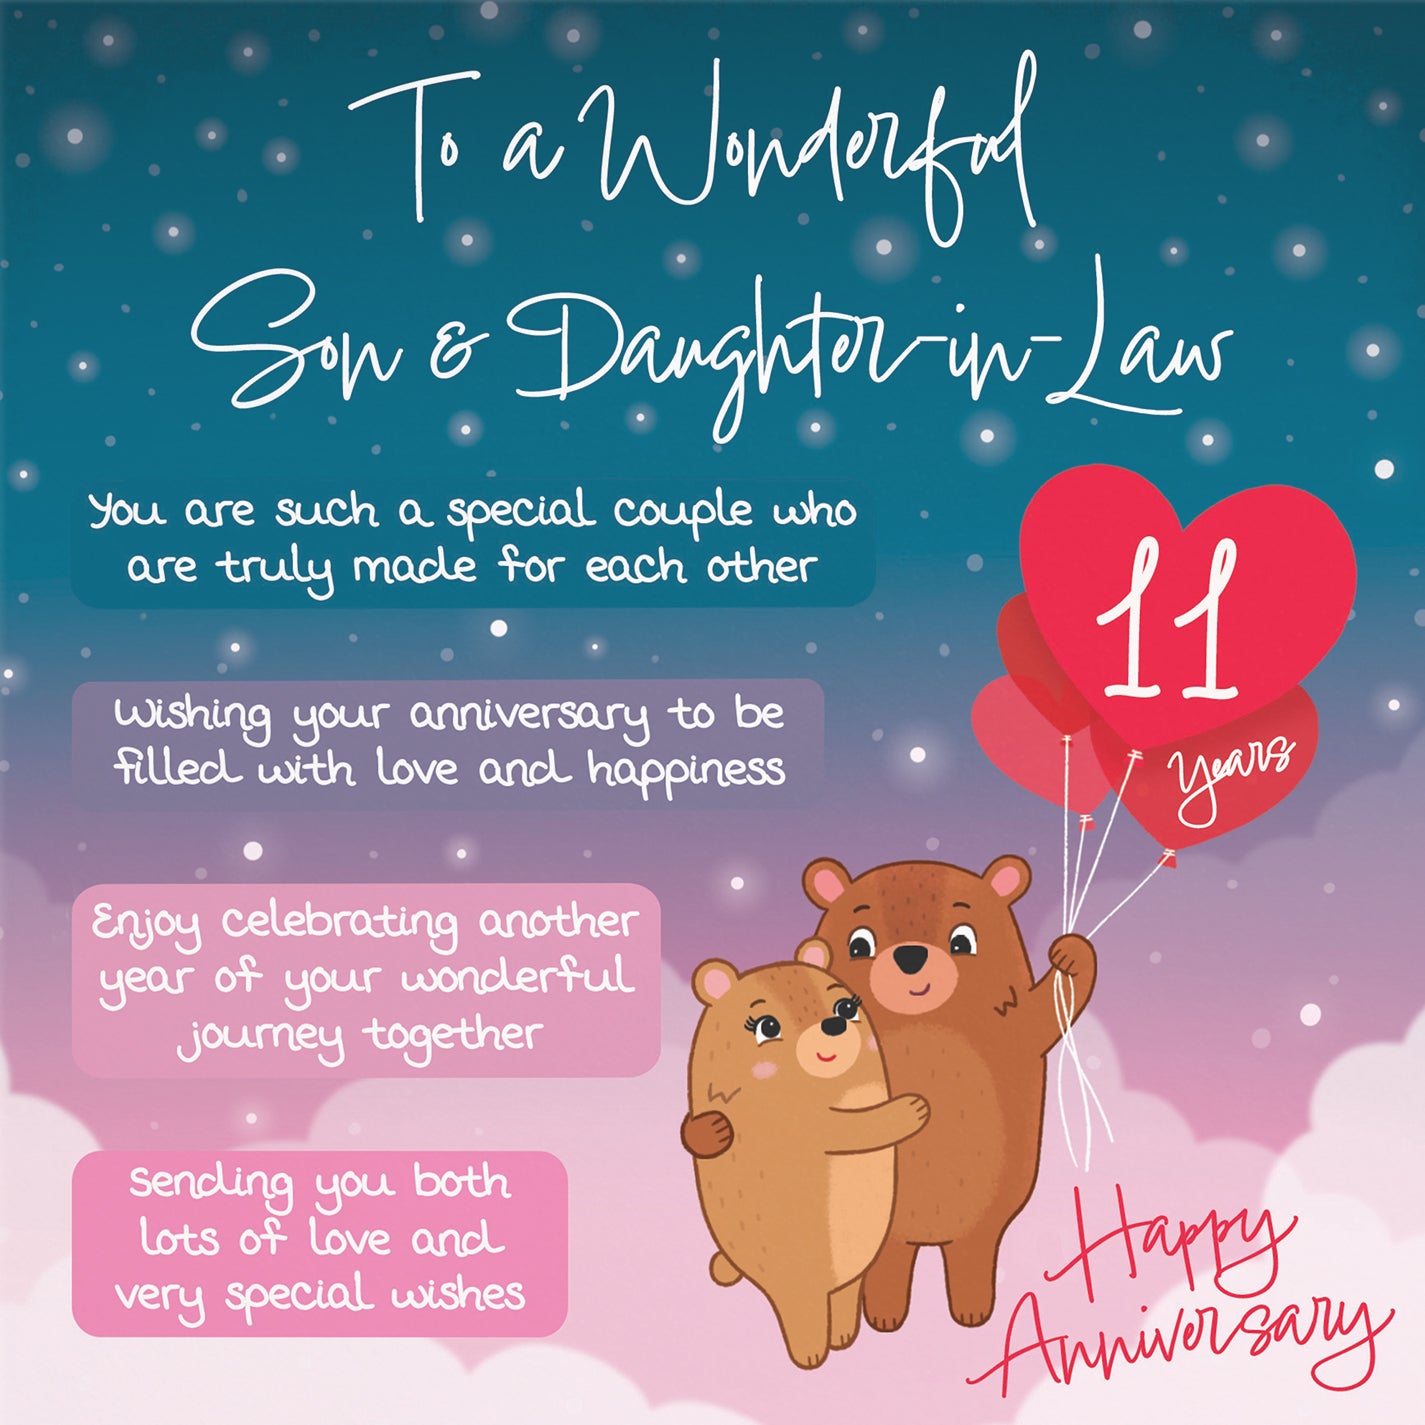 Son And Daughter In Law 11th Anniversary Card Starry Night Cute Bears